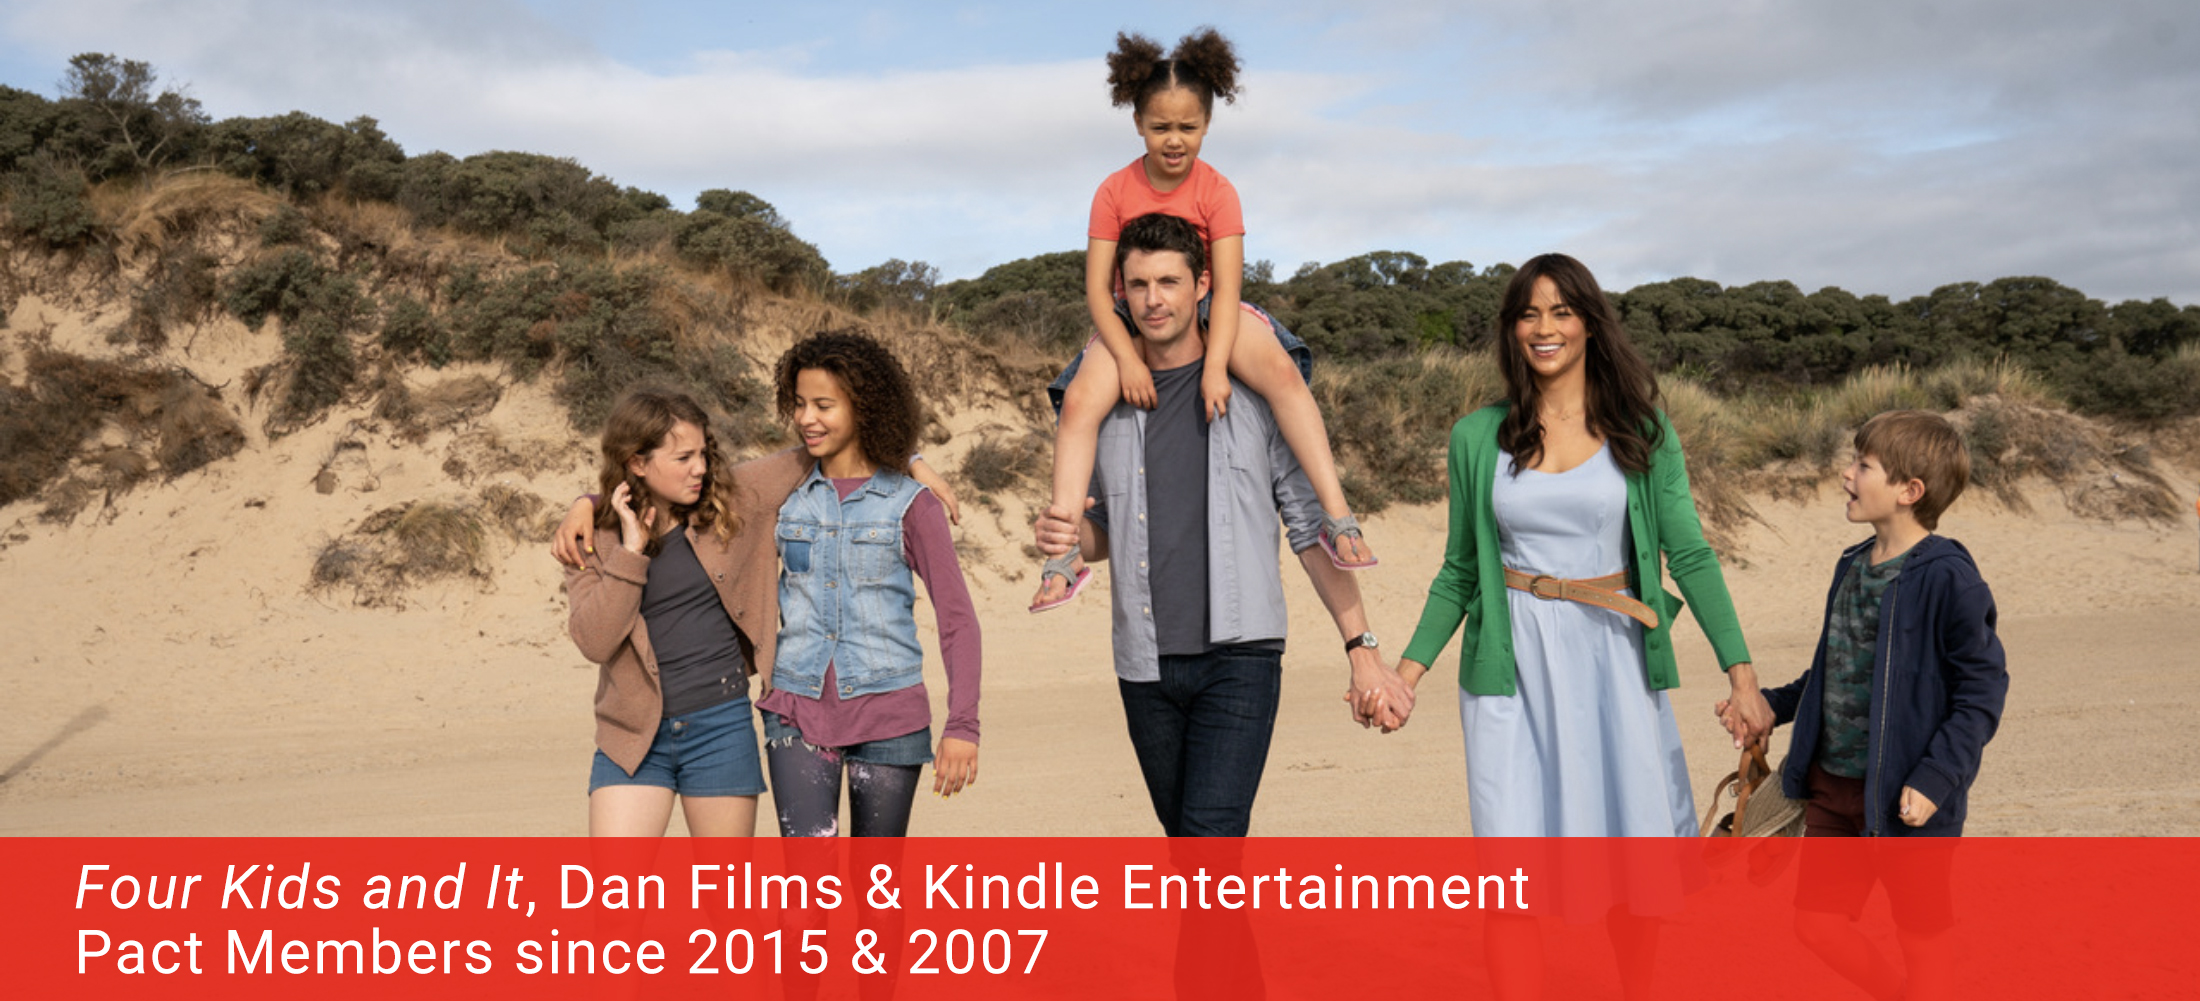 Programme image: Four Kids and It produced by Pact Members Dan Films & Kindle Entertainment